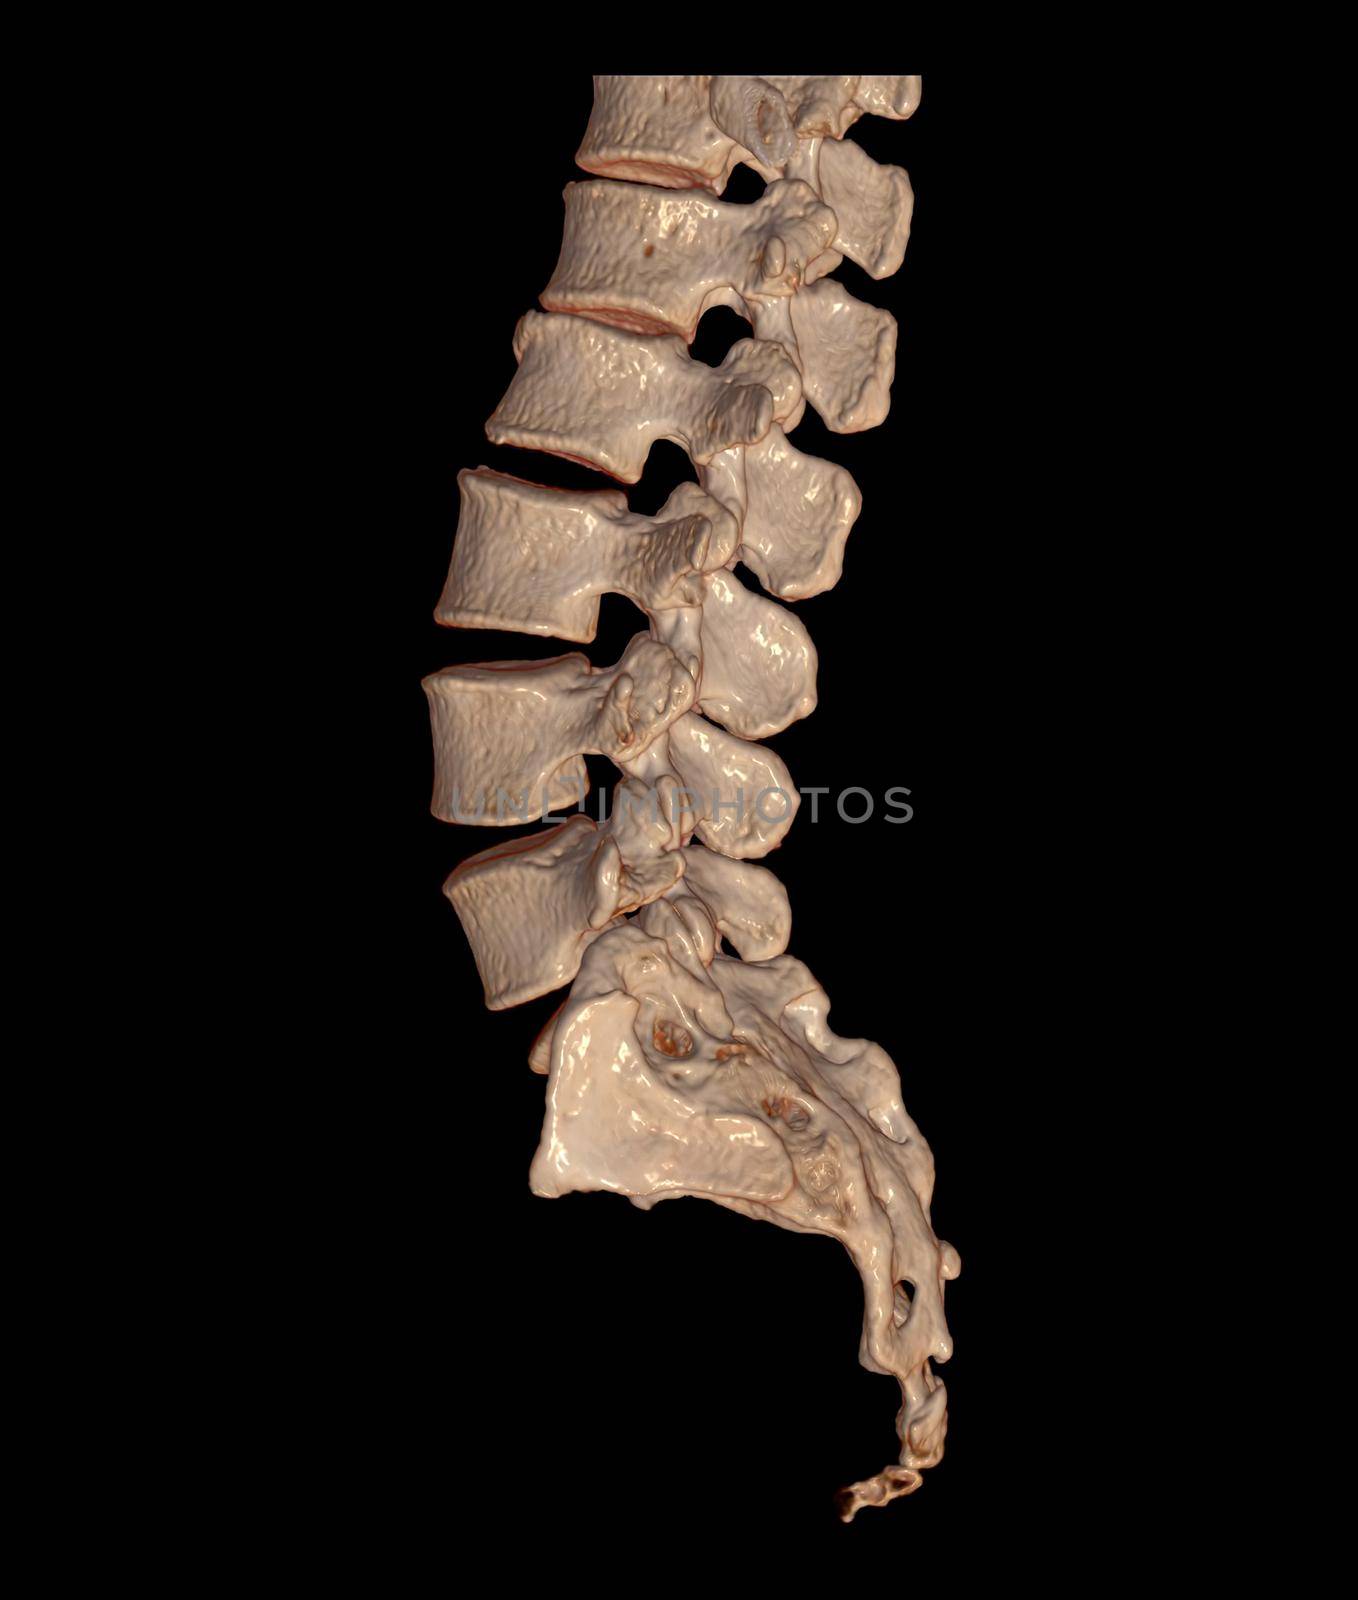 CT Lumbar or L-S spine 3D rendering image Lateral view showing Compression fractures at L2. 3D illustration.